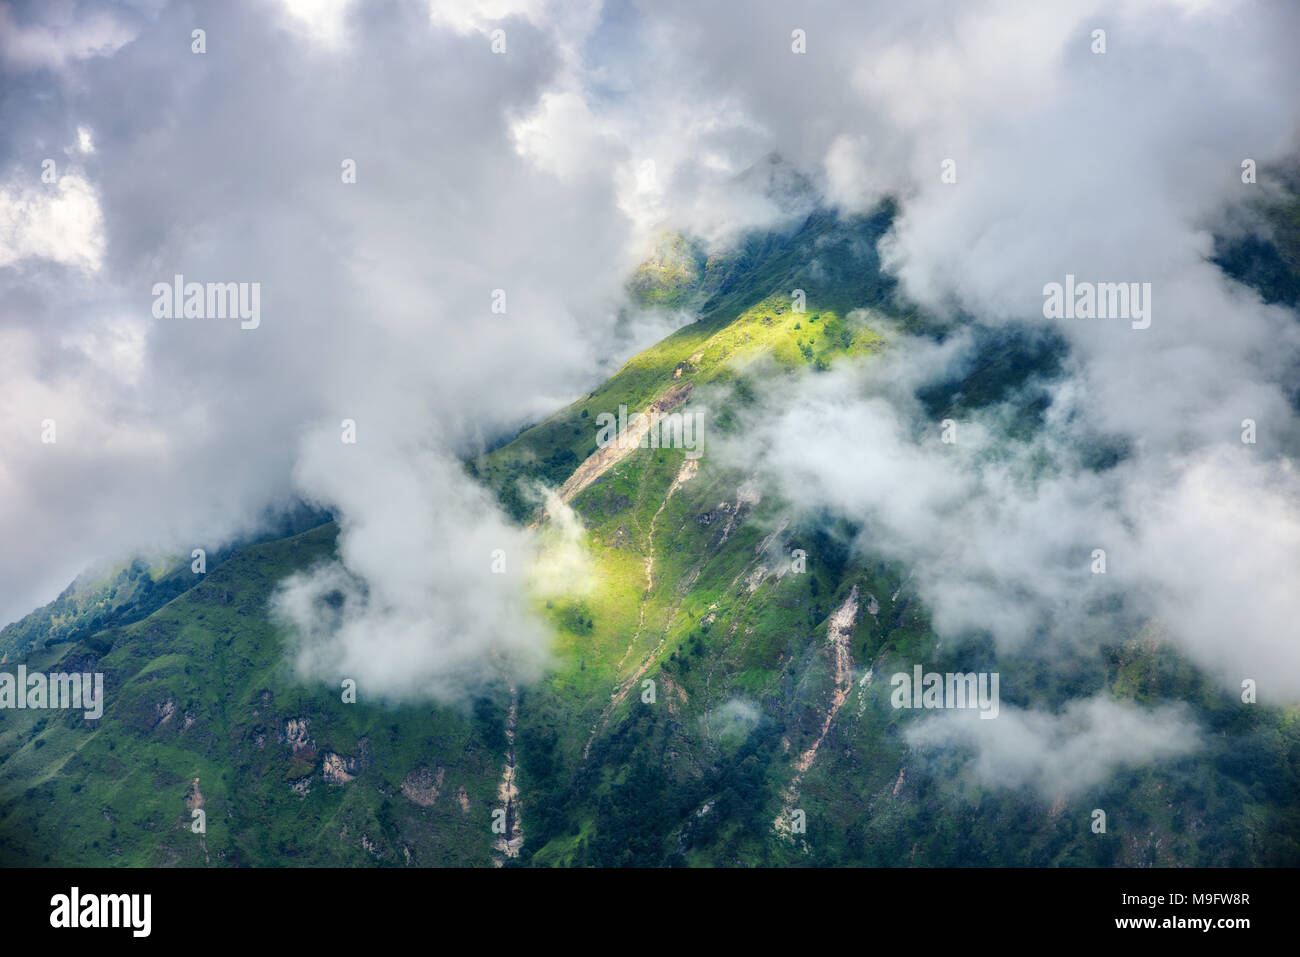 Mountains with green forest in clouds in overcast day in summer in Nepal. Landscape with beautiful hills with trees and dramatic cloudy sky at sunset. Stock Photo